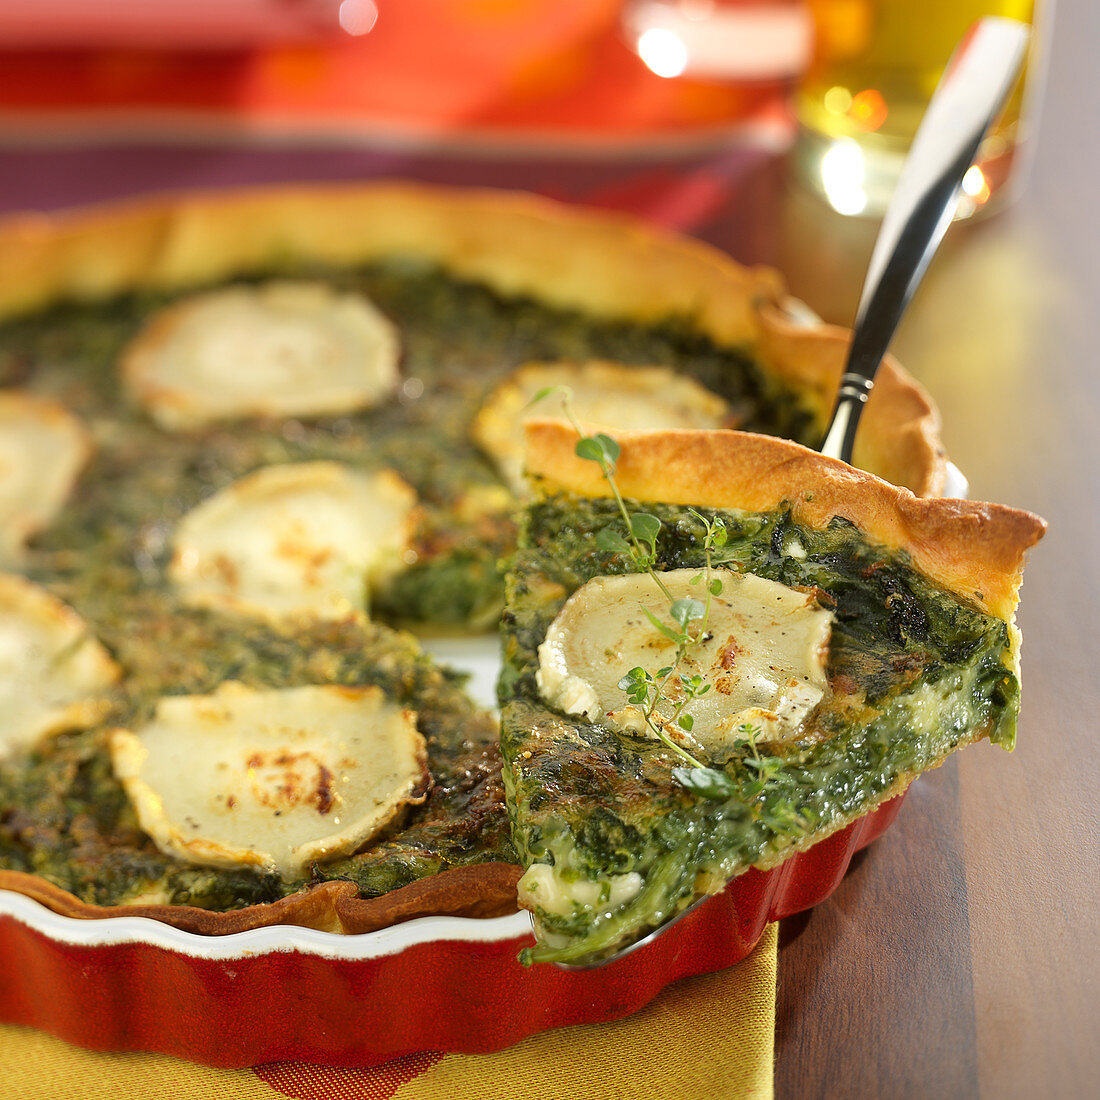 Spinach-goat's cheese tart